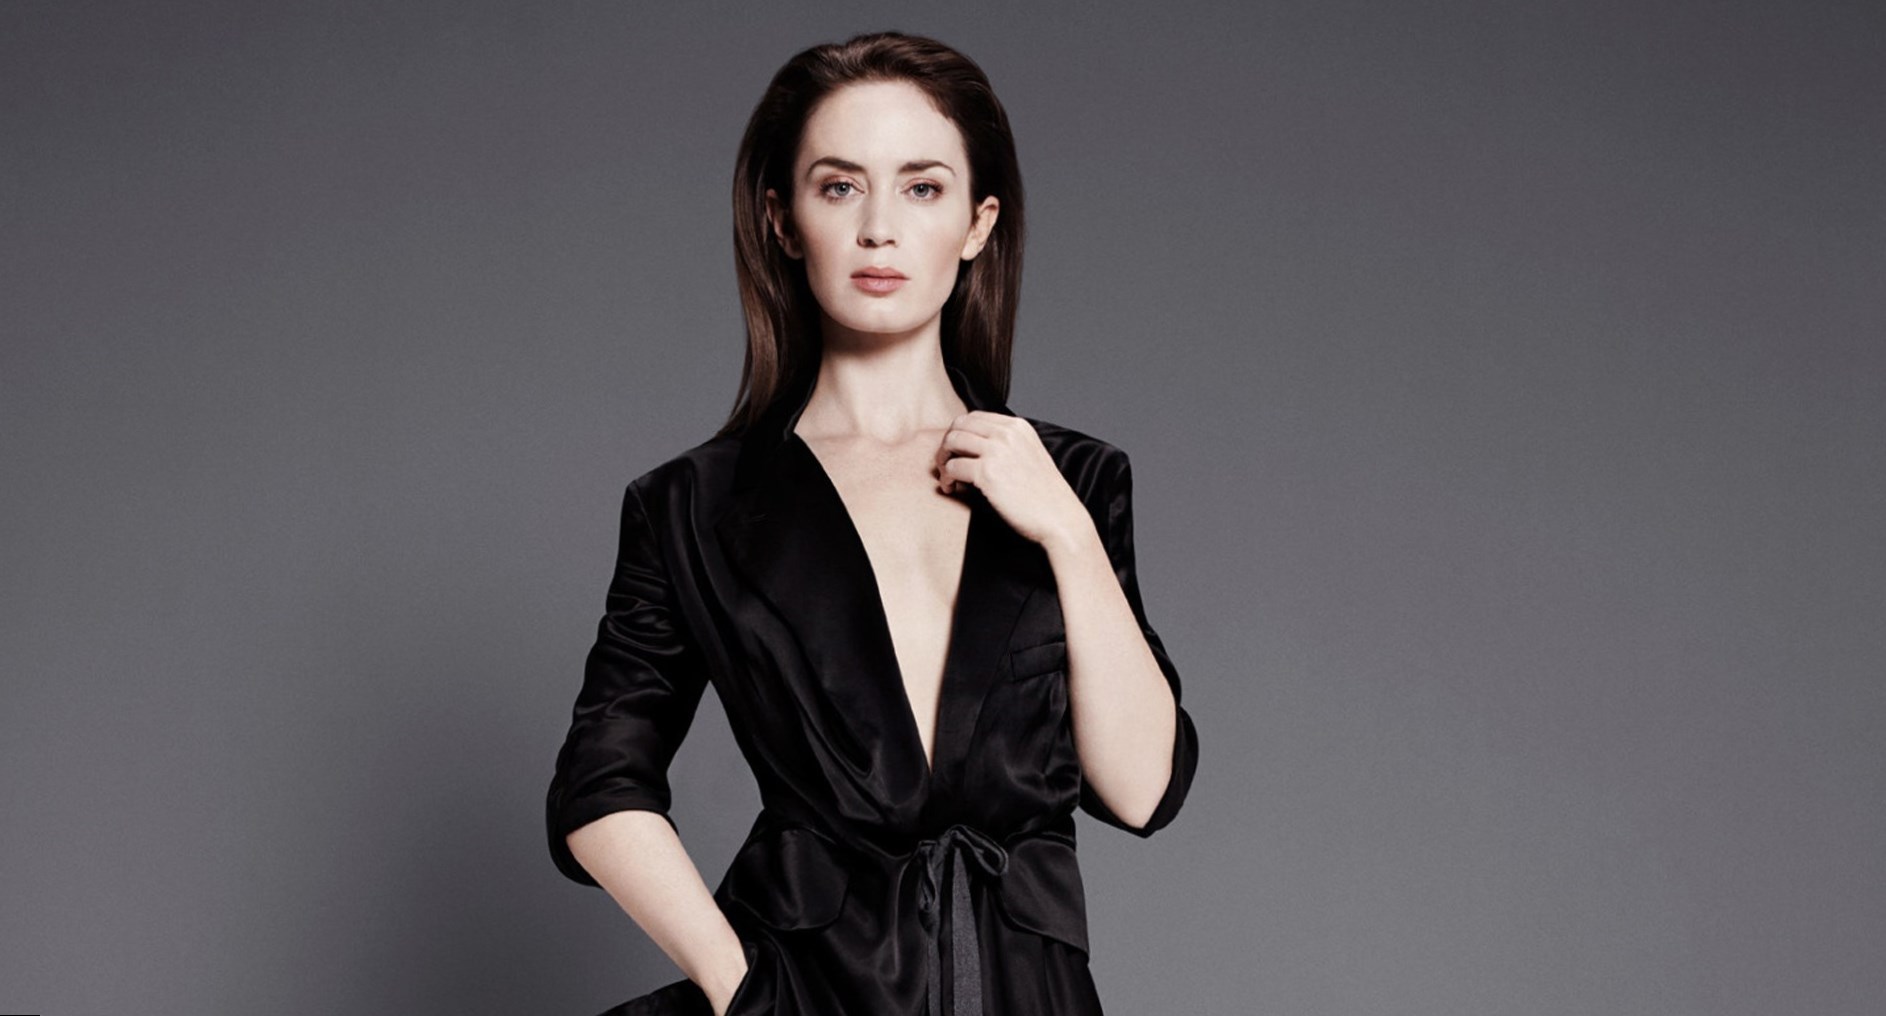 The Interview: Emily Blunt